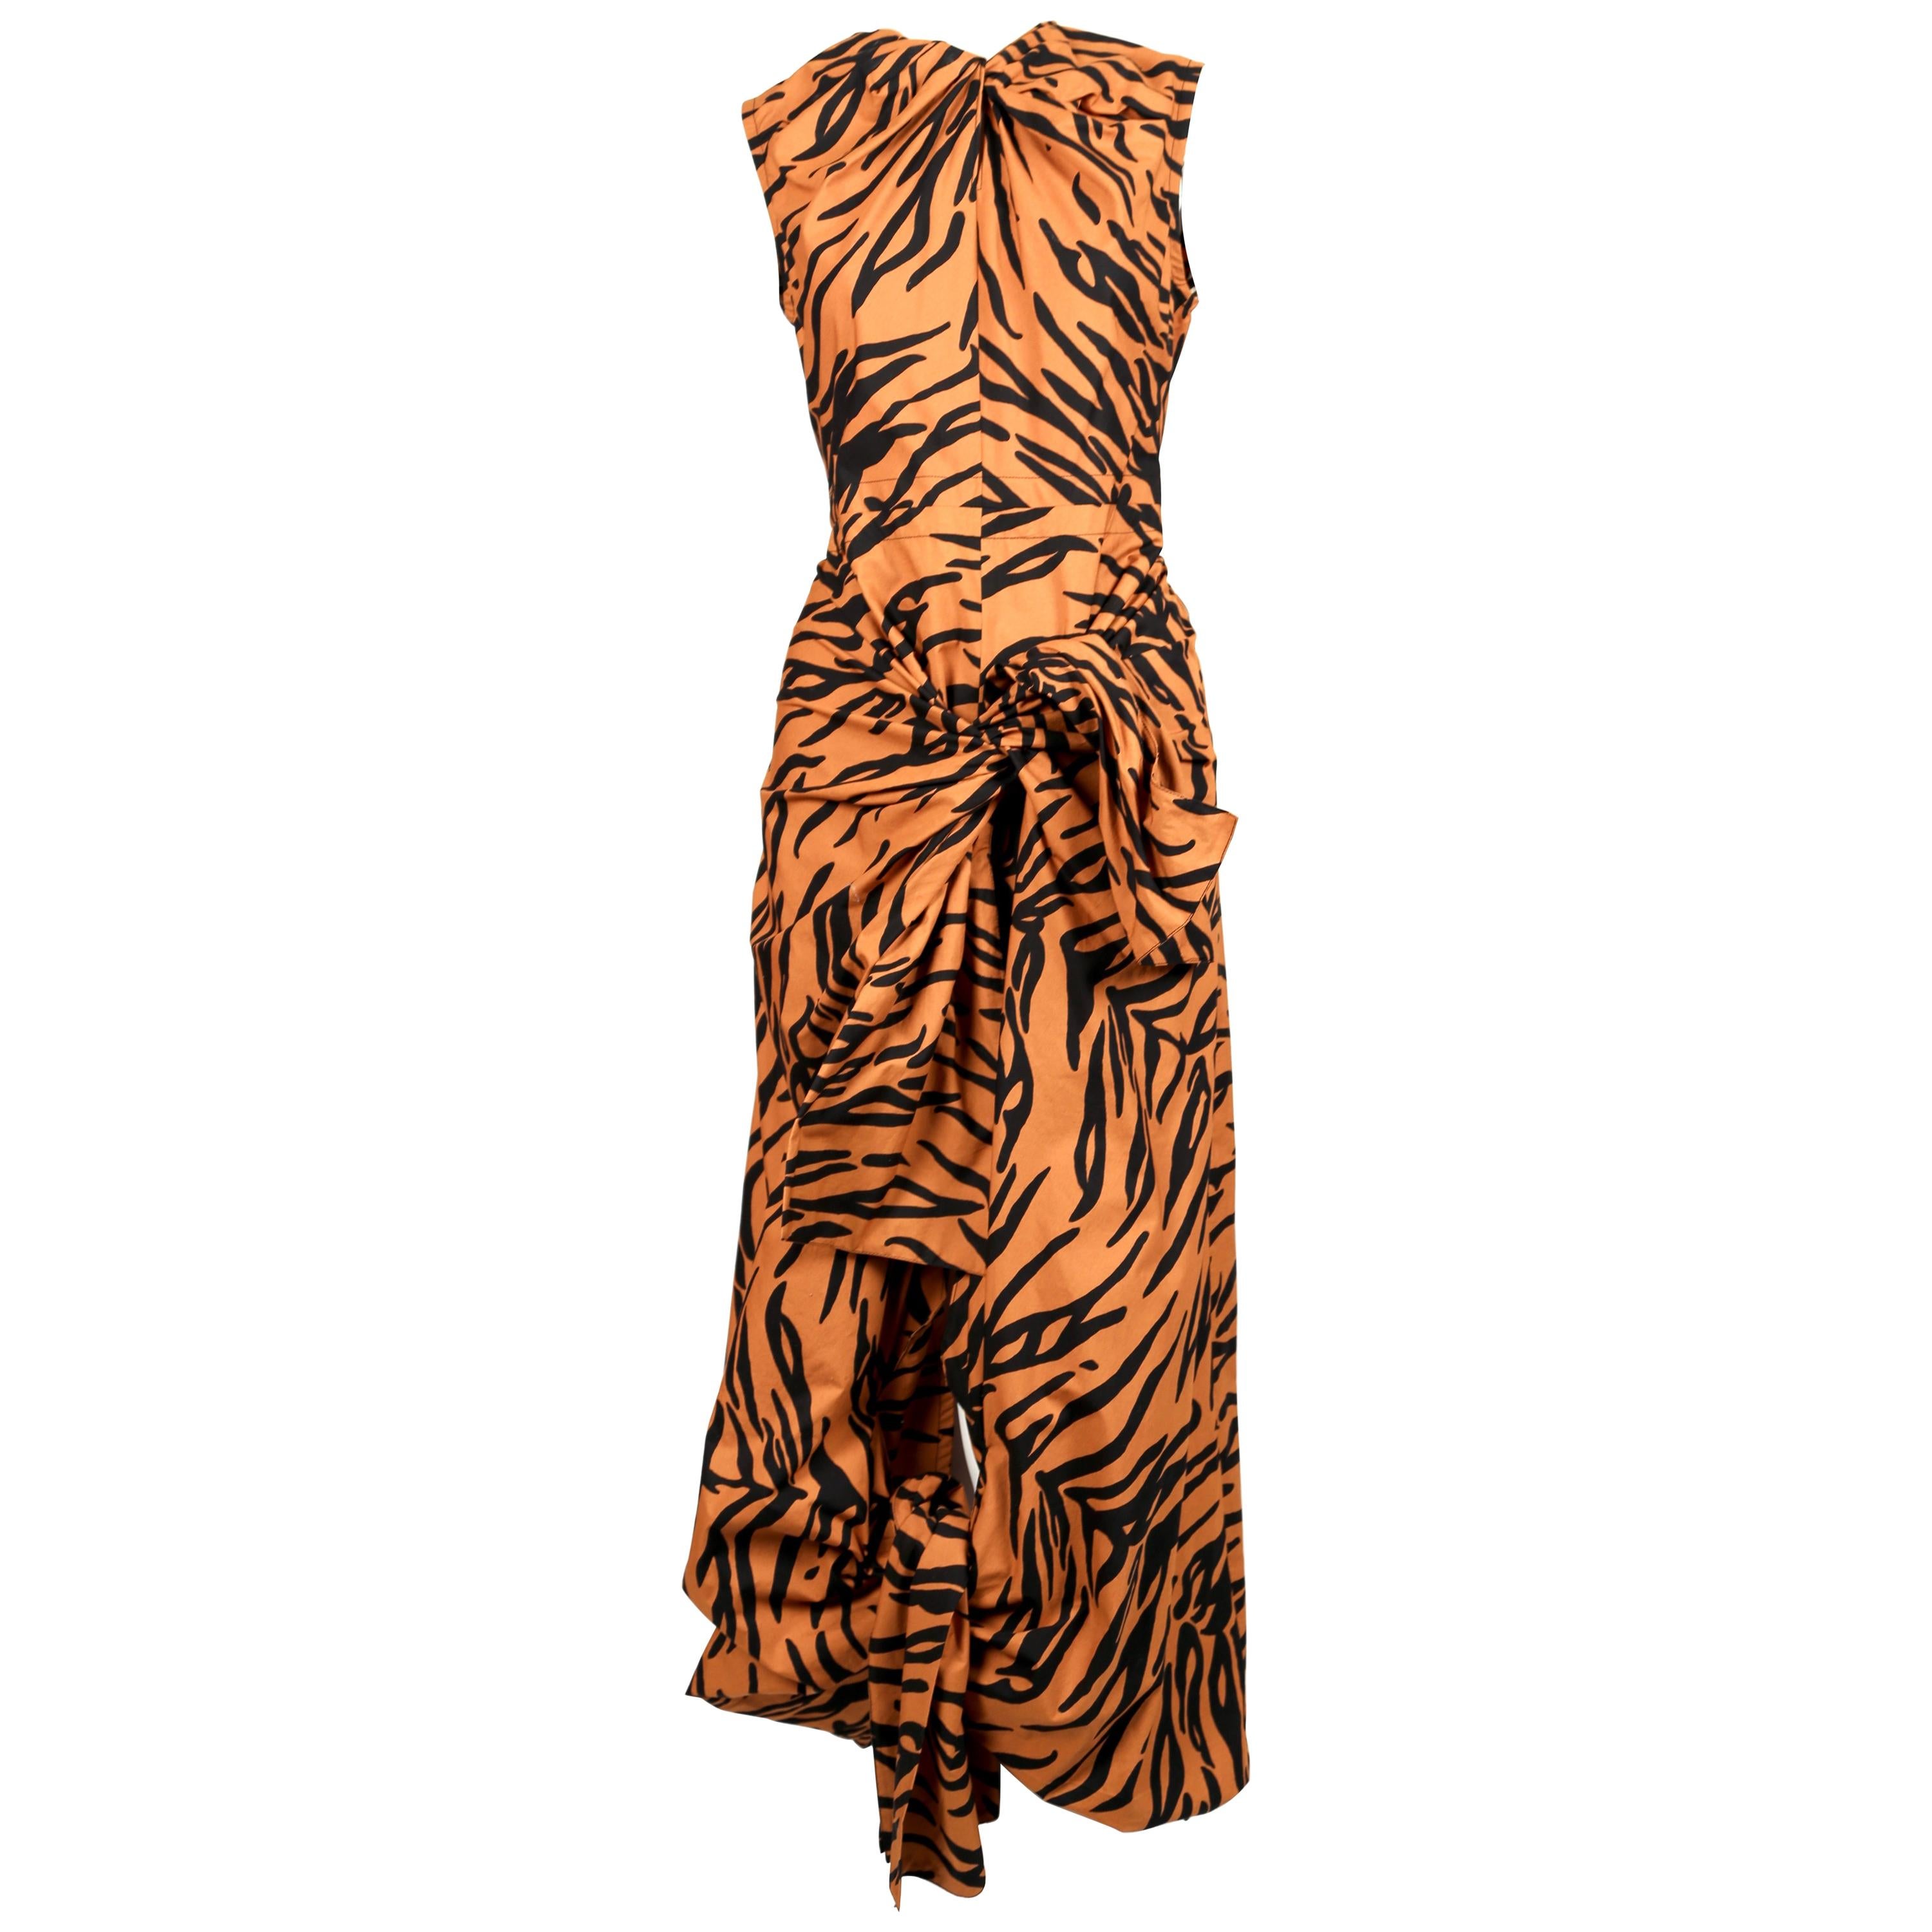 CELINE by PHOEBE PHILO tiger print draped dress with open back - new